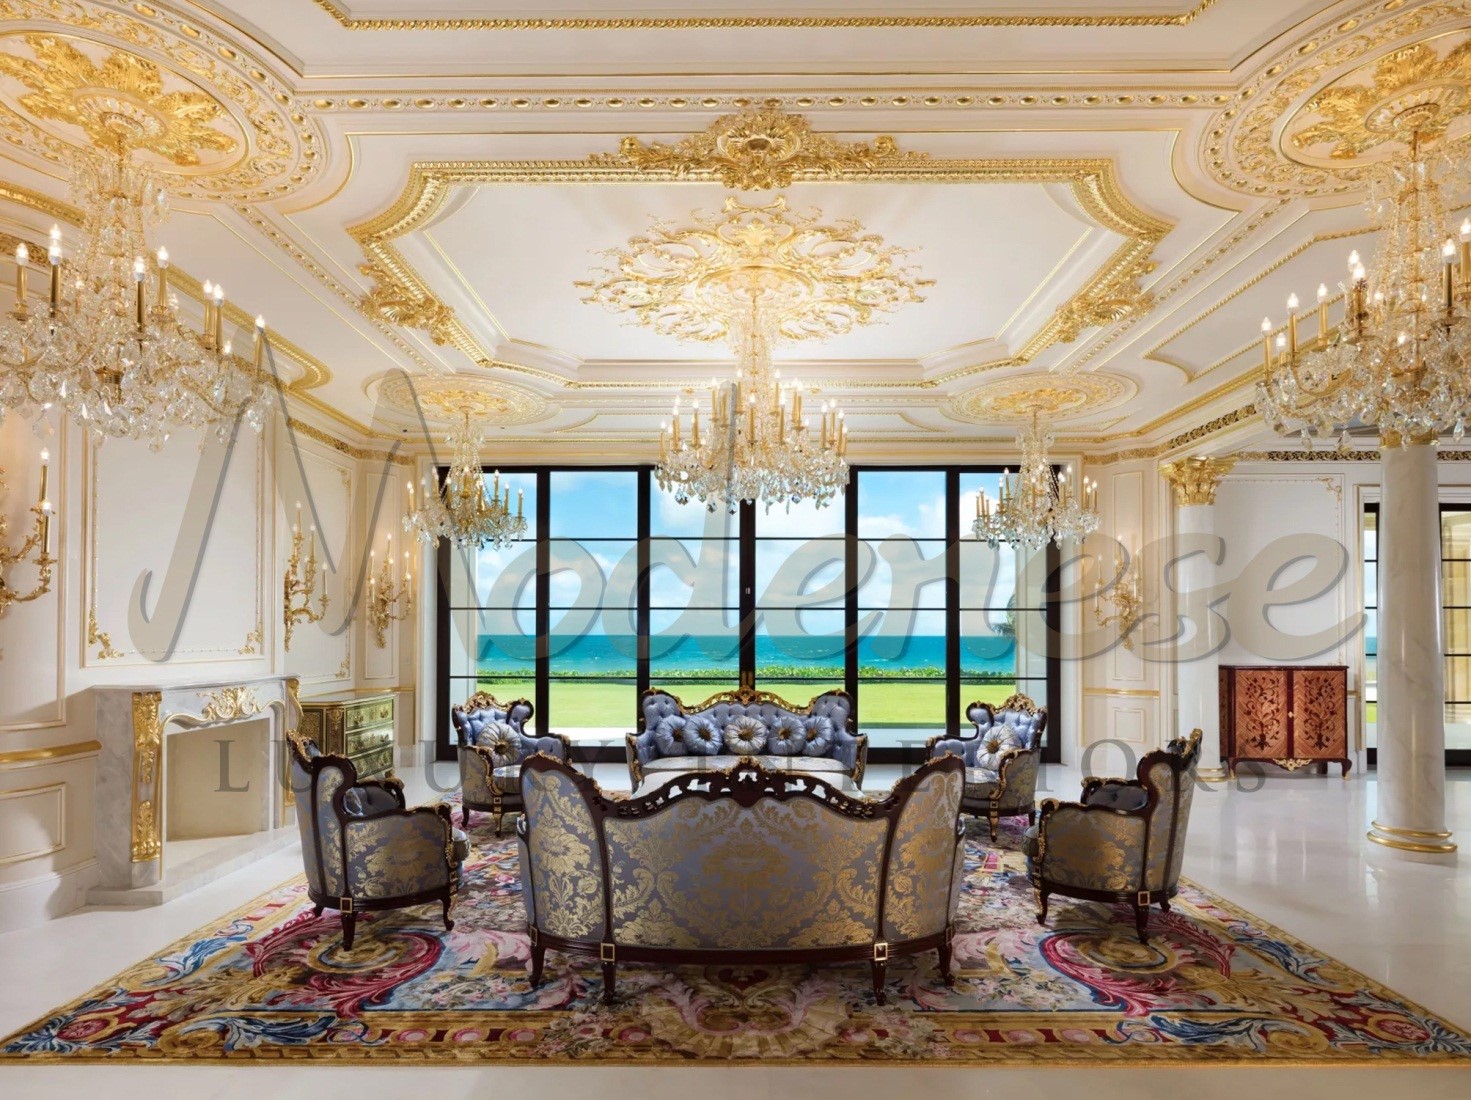 The royal style villa by best interior design company in Bahrain